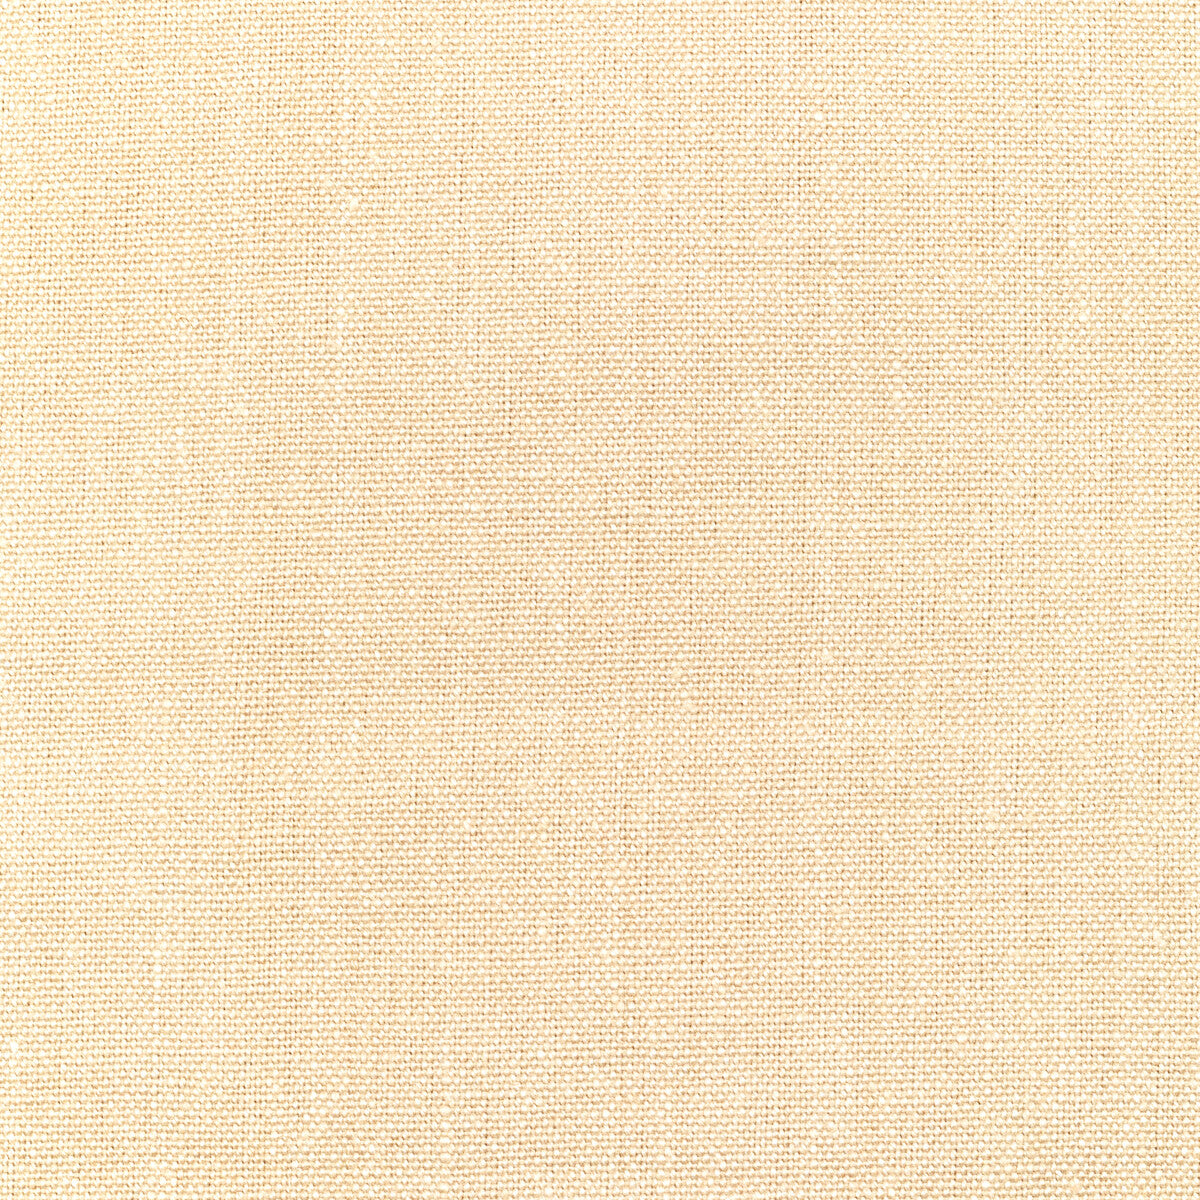 Sweeting fabric in eggshell color - pattern 32815.1.0 - by Kravet Basics in the Thom Filicia collection